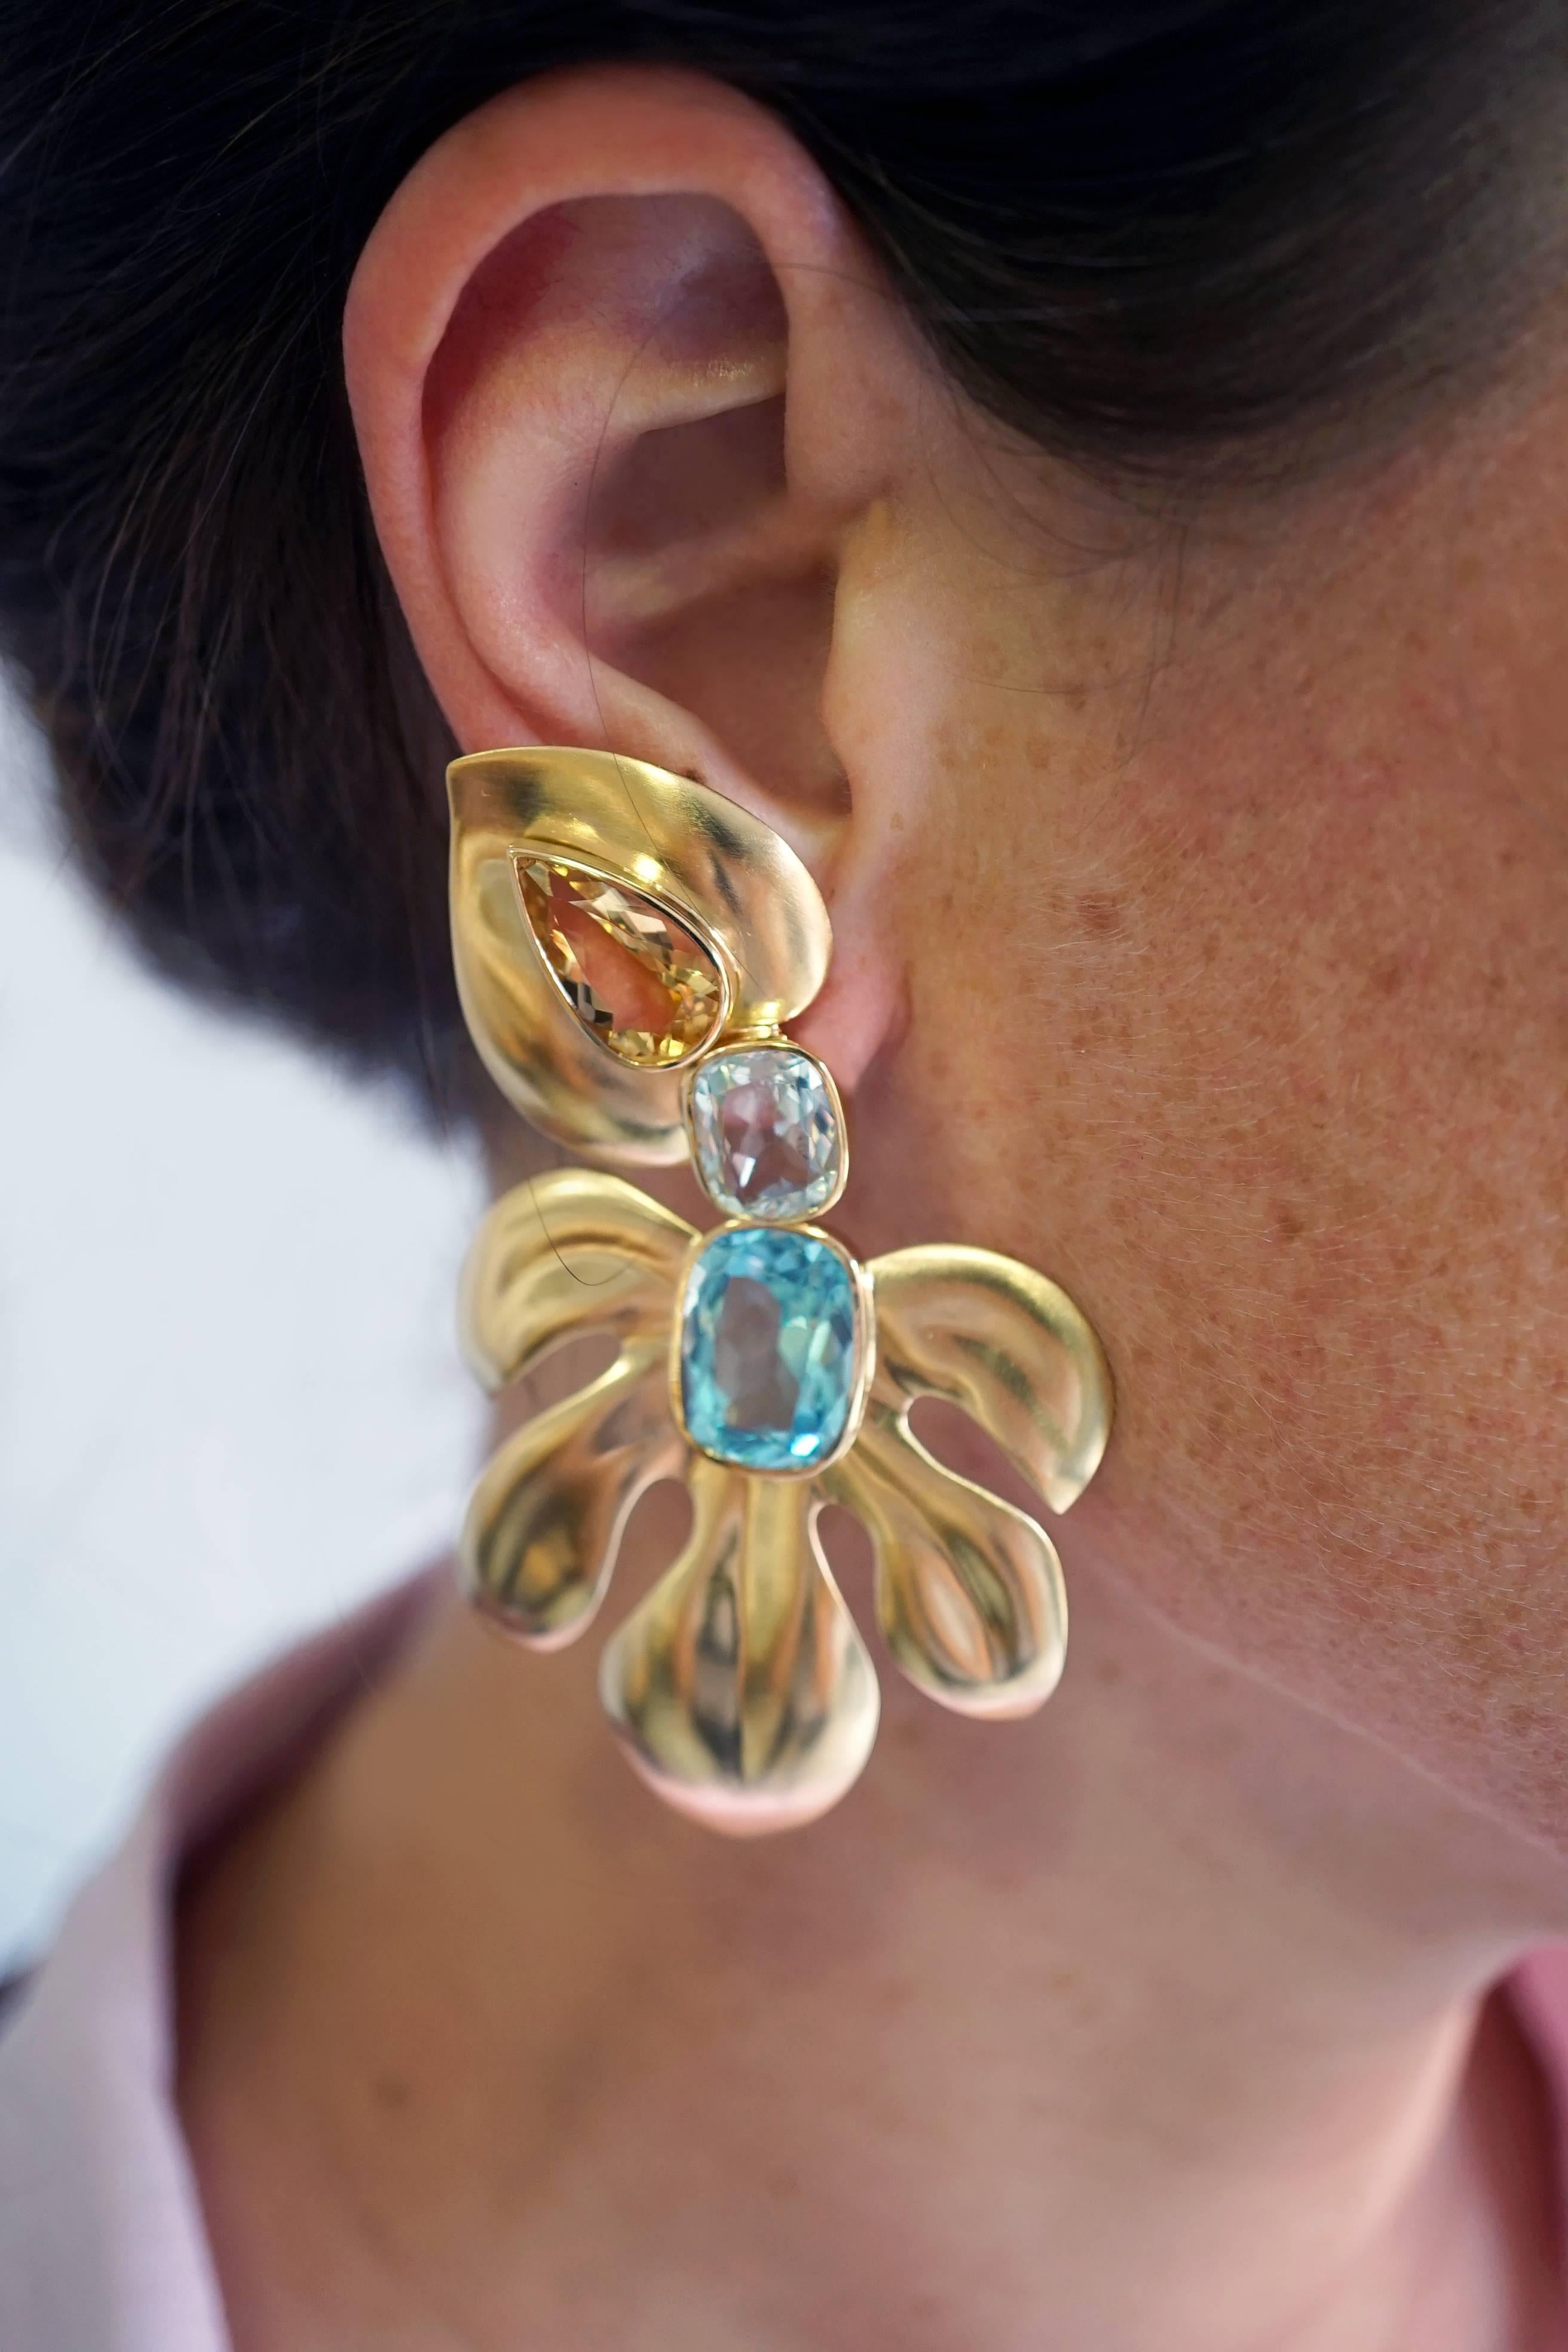 Coralie Van Caloen 18k Gold Beryl And Aquamarine Tropical Clip-on Earrings are entirely hand made and forged in Belgium by experts goldsmiths therefore they are very unique. The earrings are set with beryls and different shades of blue aquamarines